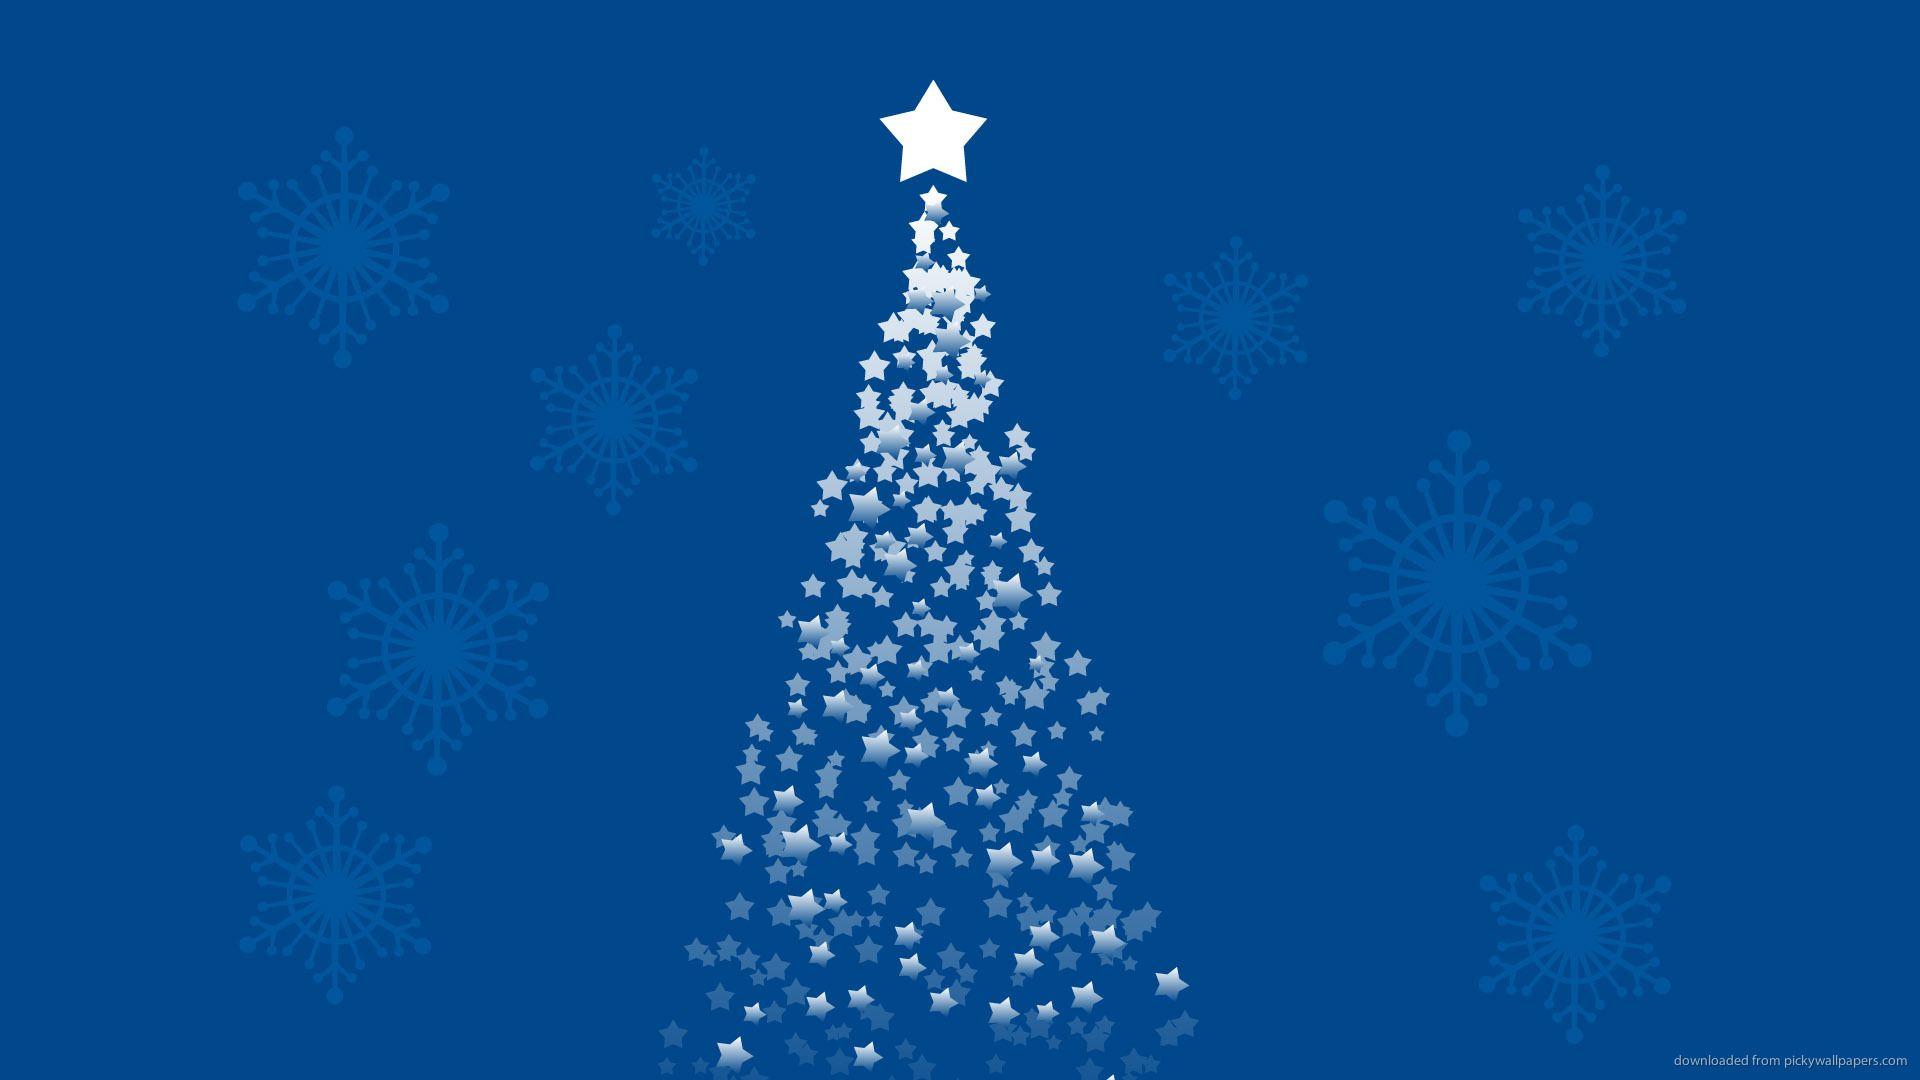 Ascending Star Forming A Christmas Tree On A Blue Background